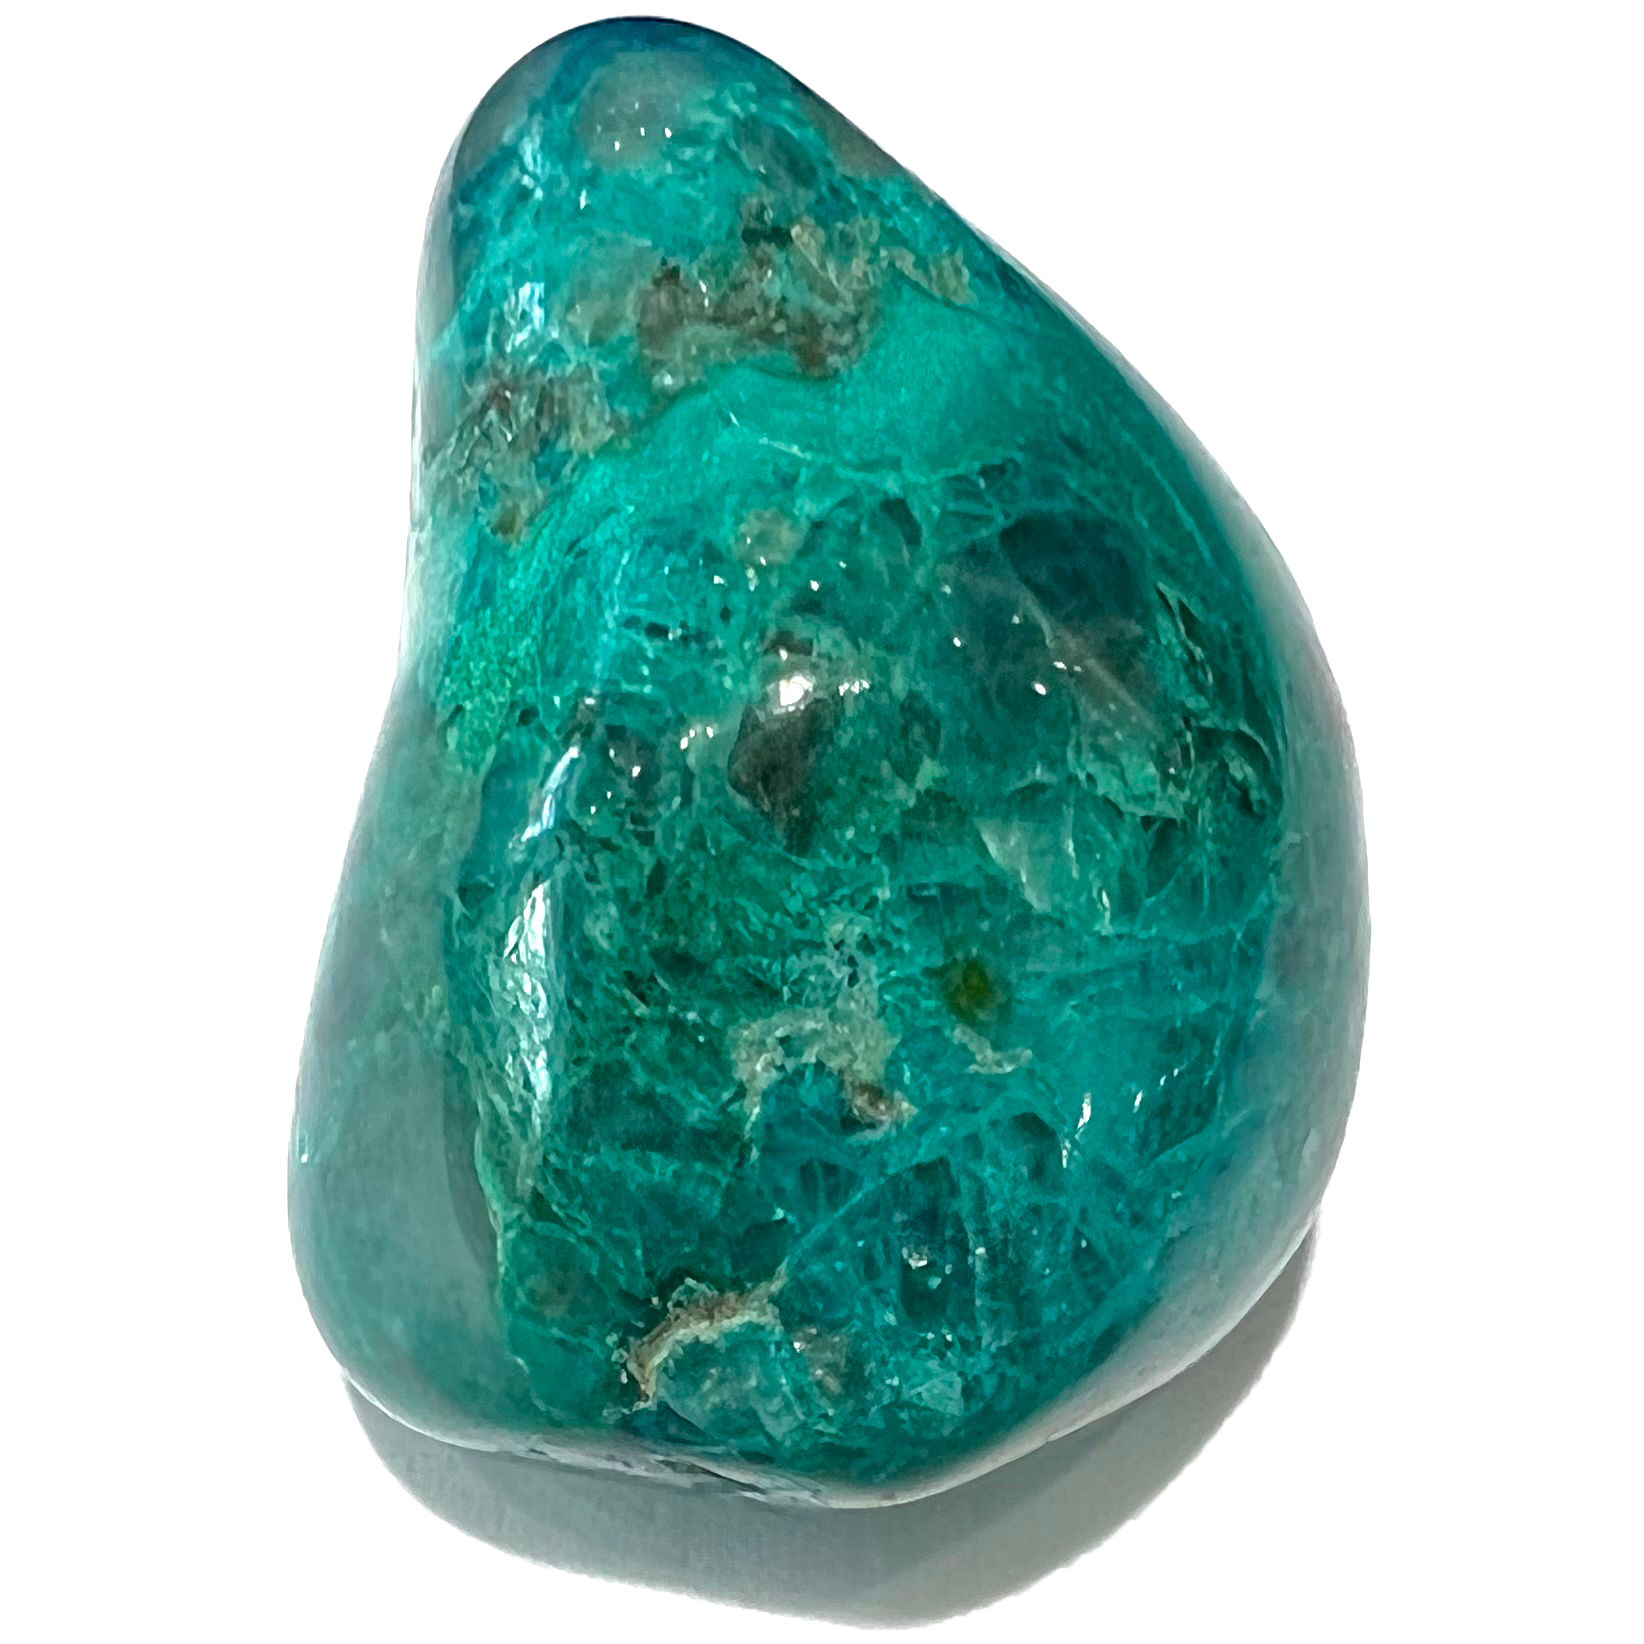 A tumbled chrysocolla stone.  The stone is a bright blue-green with blue azurite webbing.